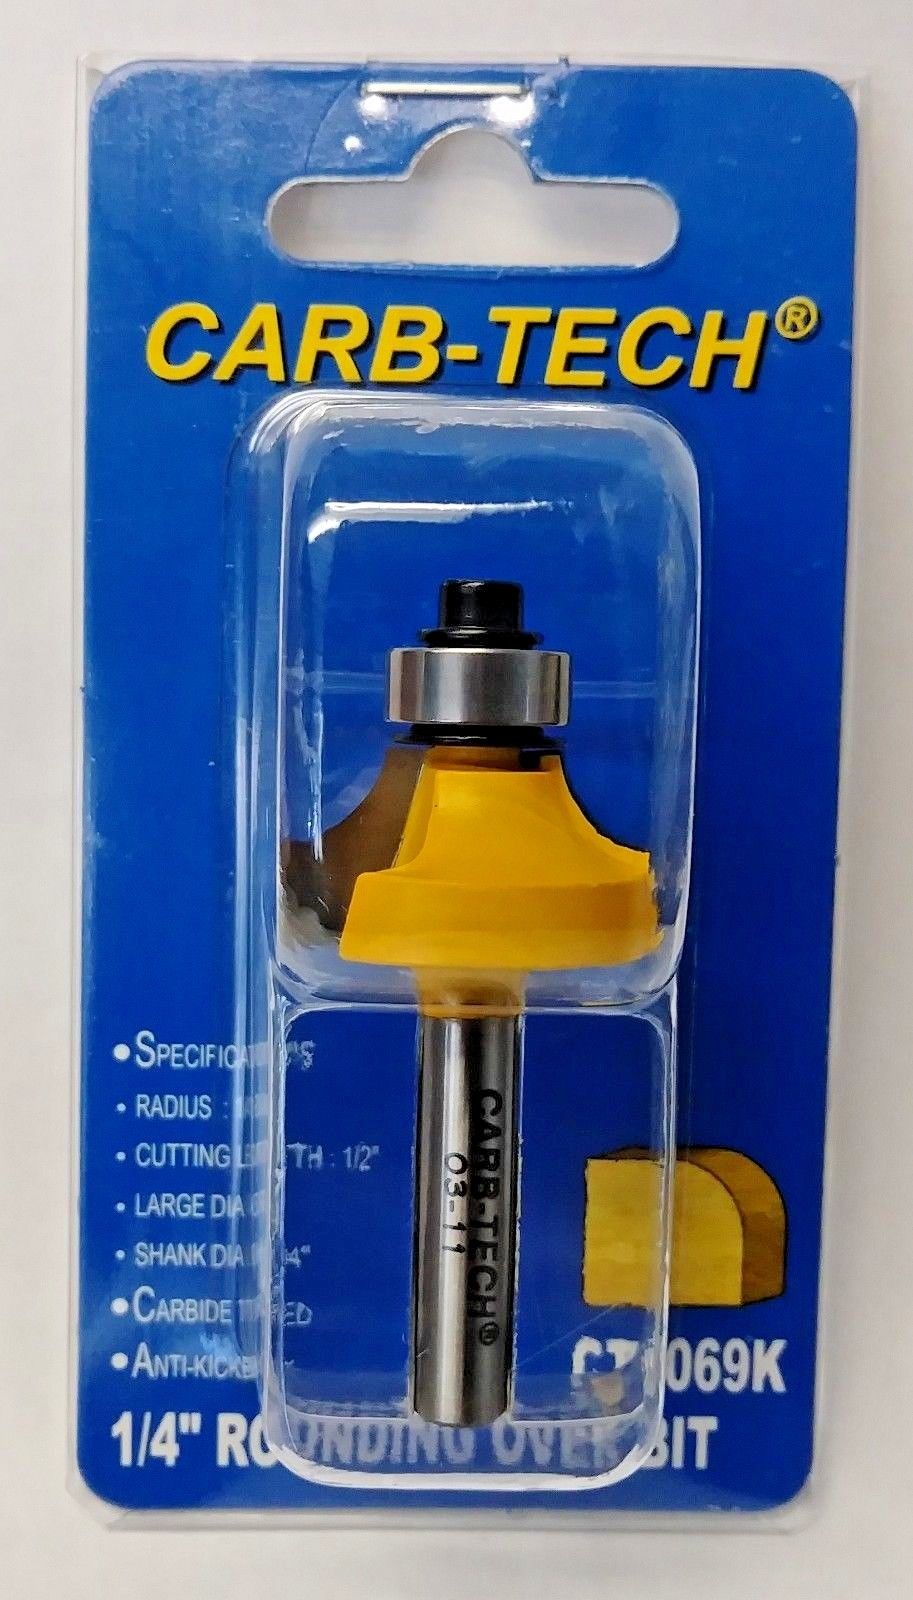 Carb-Tech CT1069K 1/4" Rounding Over Router Bit Carbide Tipped